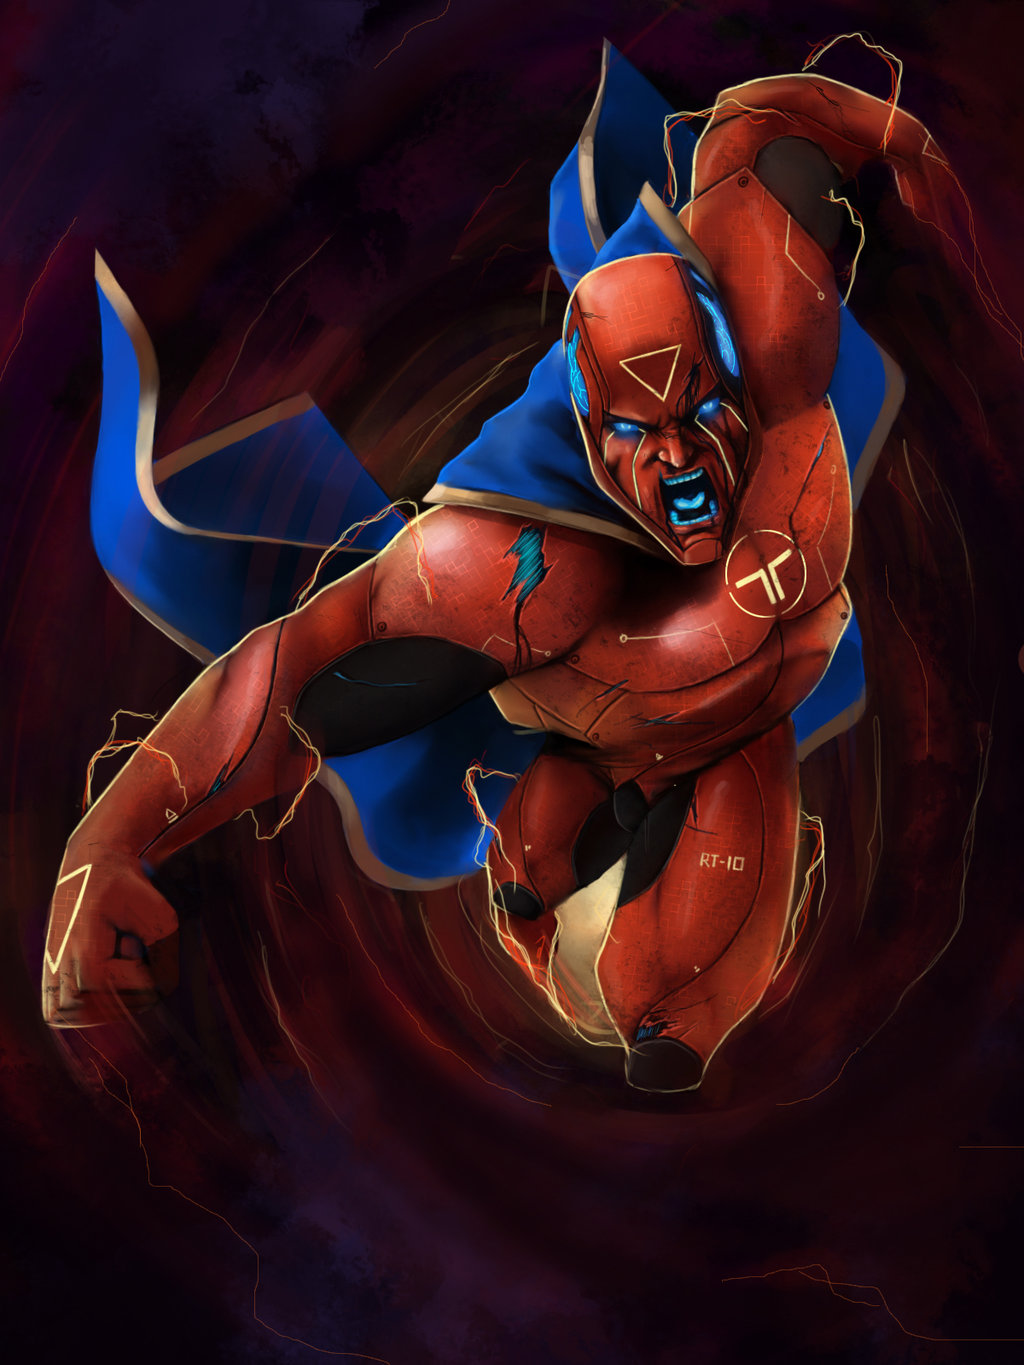 Red Tornado wallpapers, Comics, HQ Red Tornado pictures | 4K Wallpapers ...